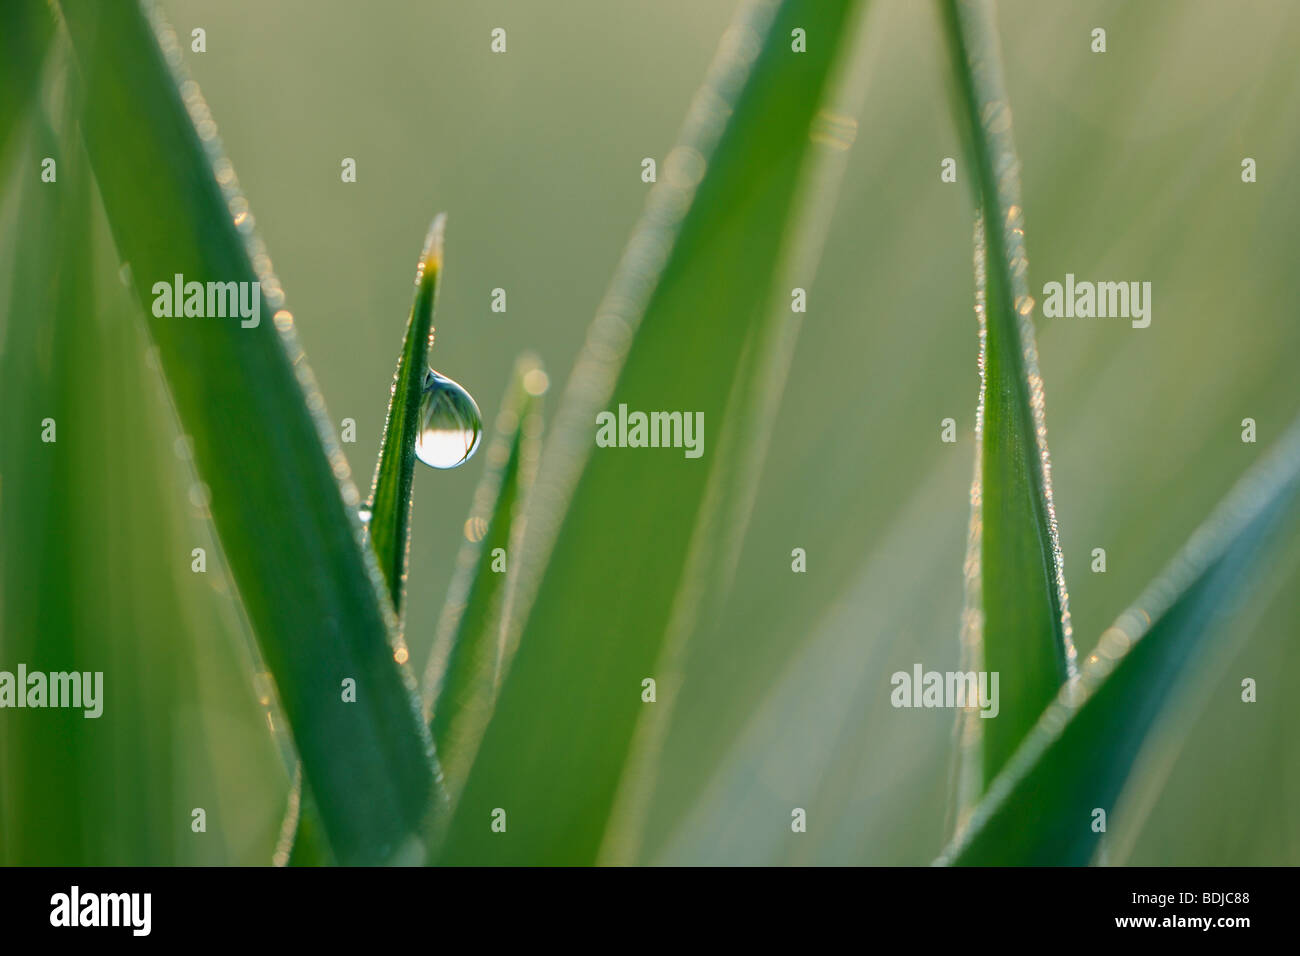 Dew Drop on Blade of Grass Stock Photo